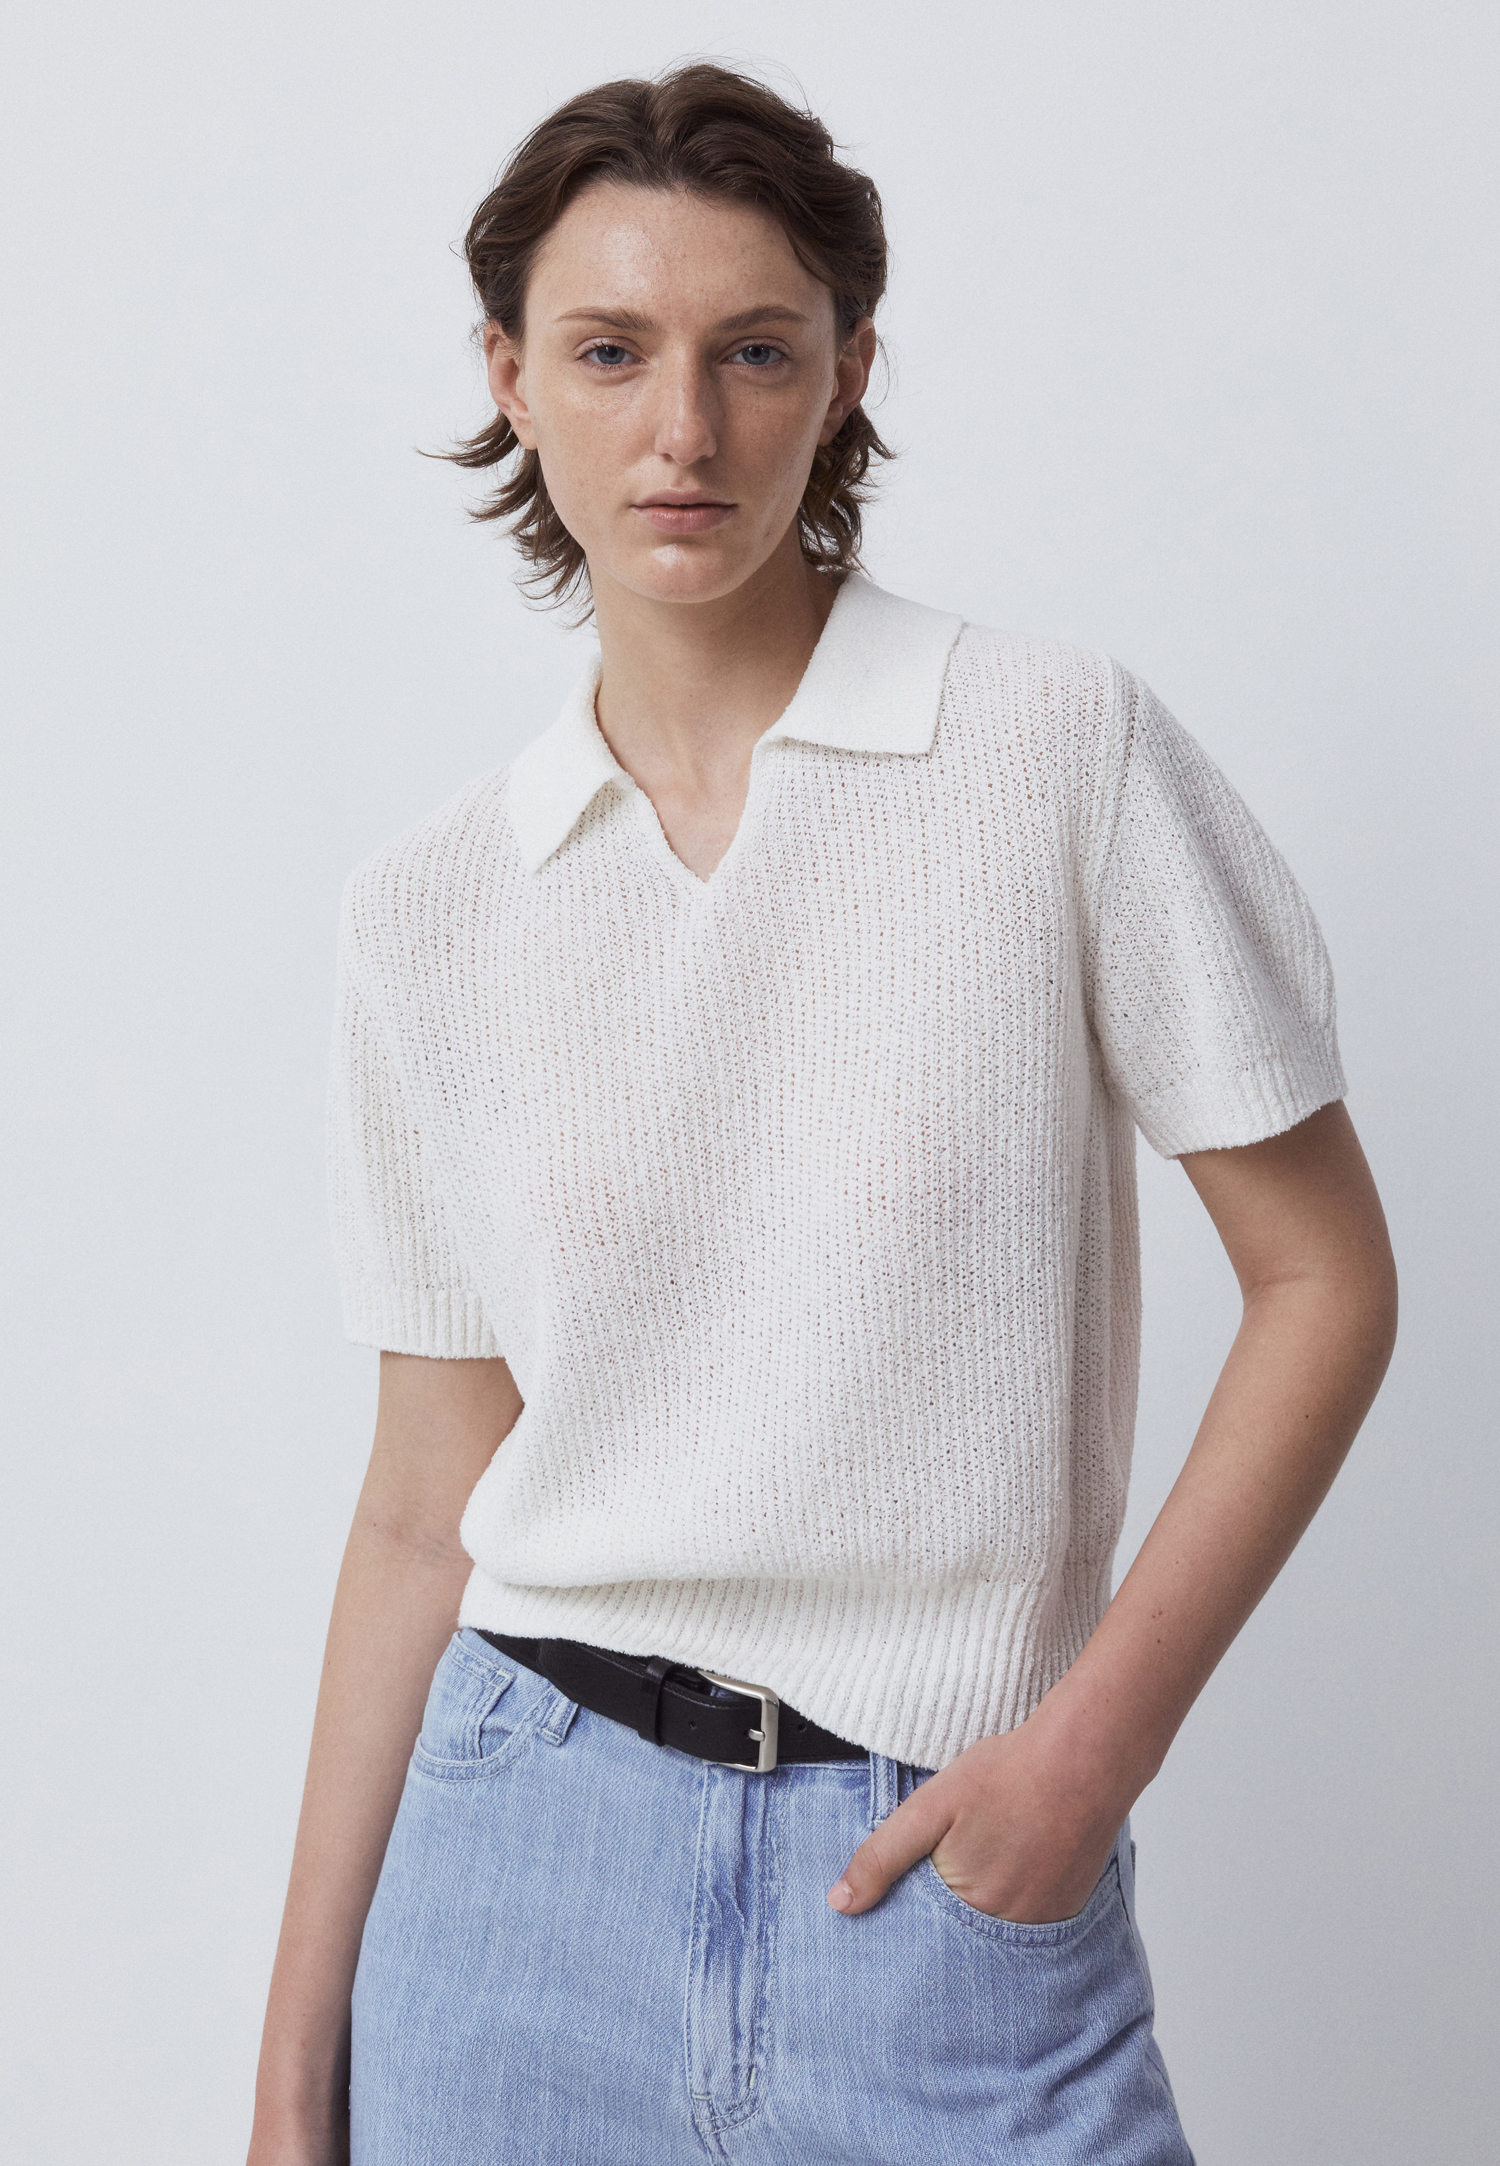 OPEN COLLAR KNIT TOP - WHITE